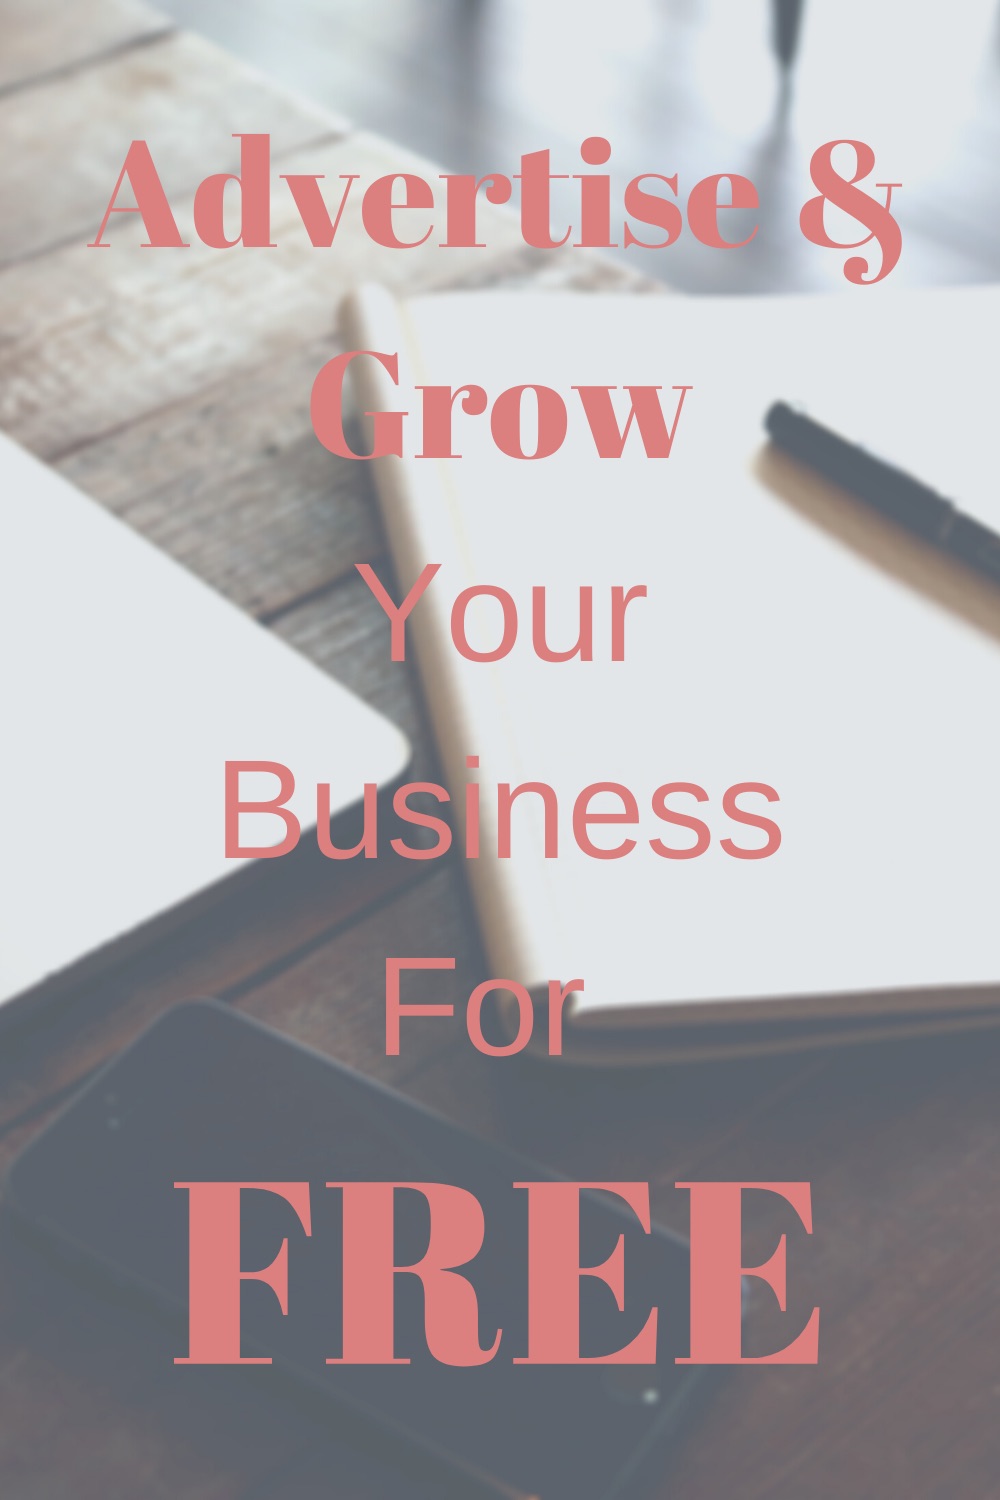 How to grow and advertise your business without paying for it